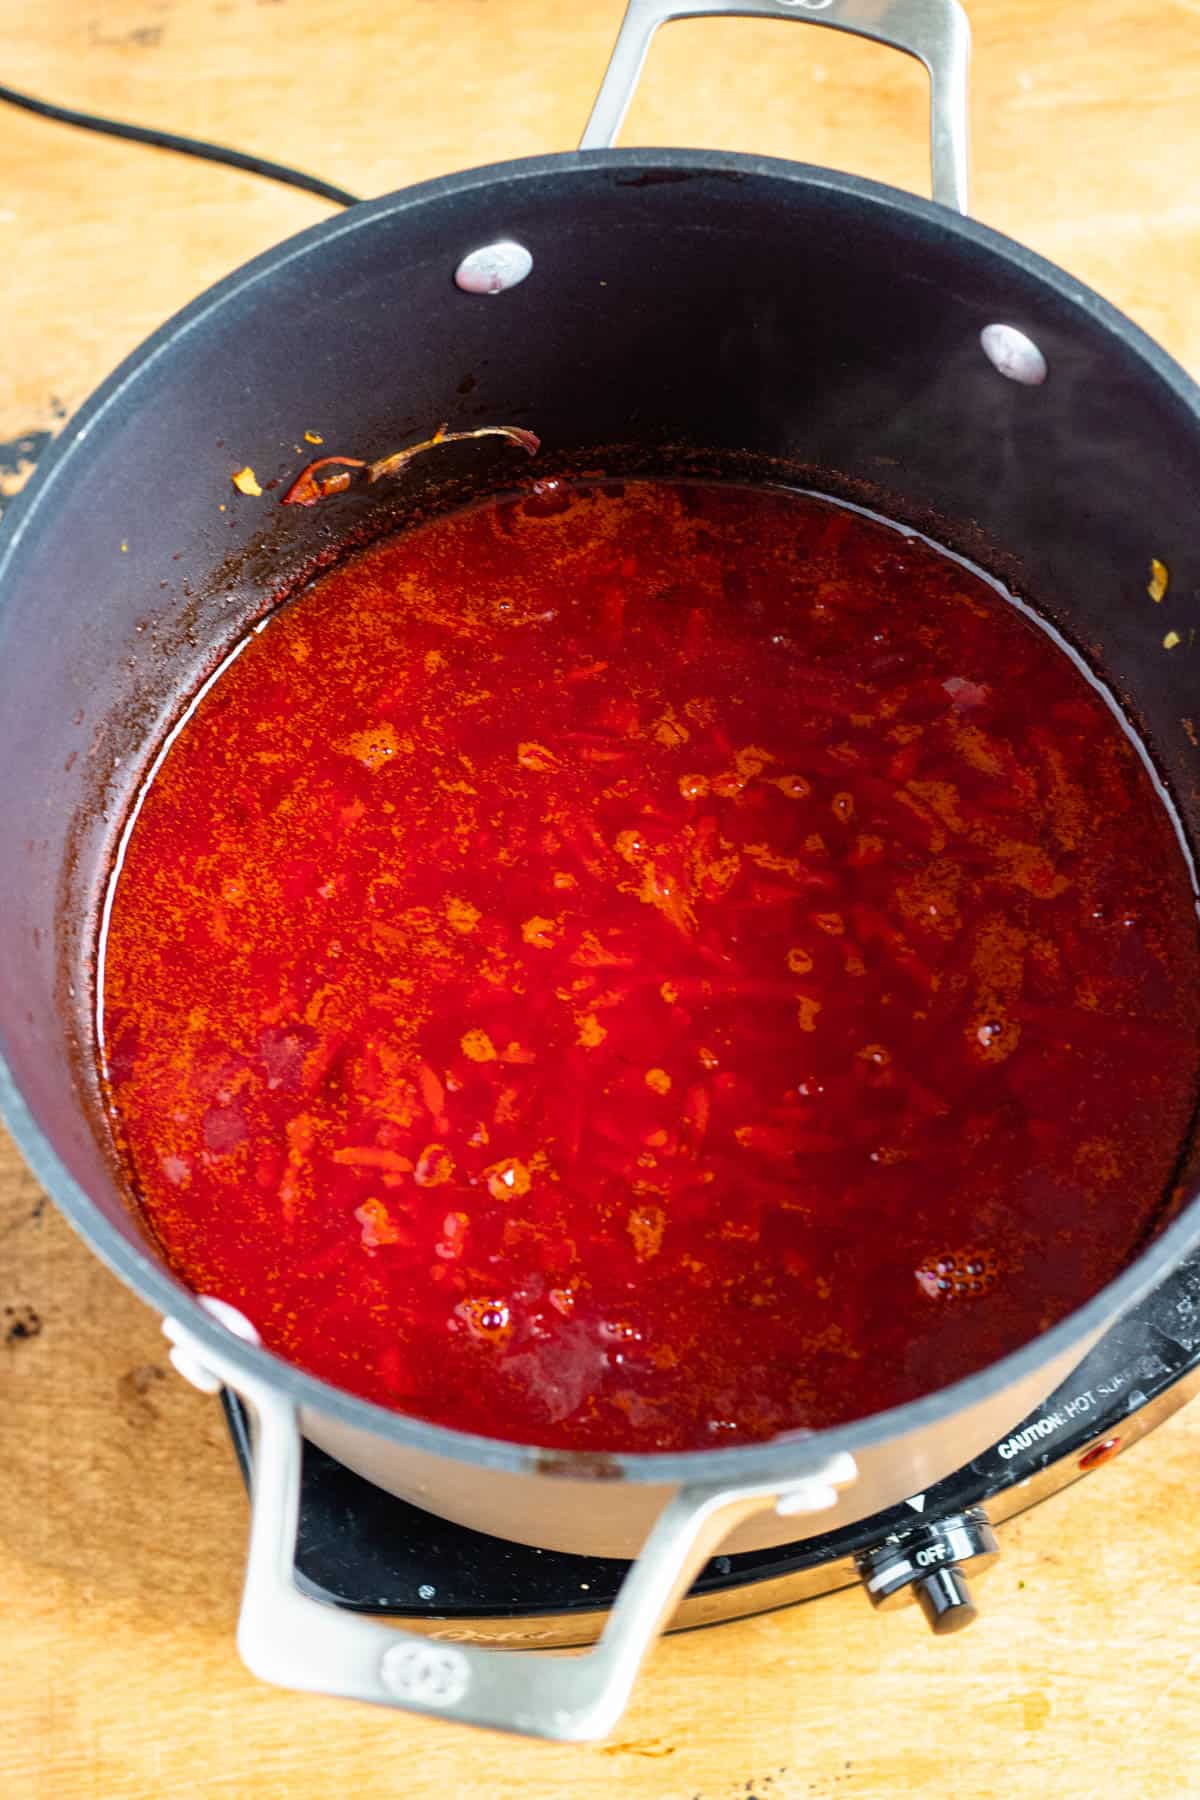 Cooked and bubbling red soup in a large soup pot